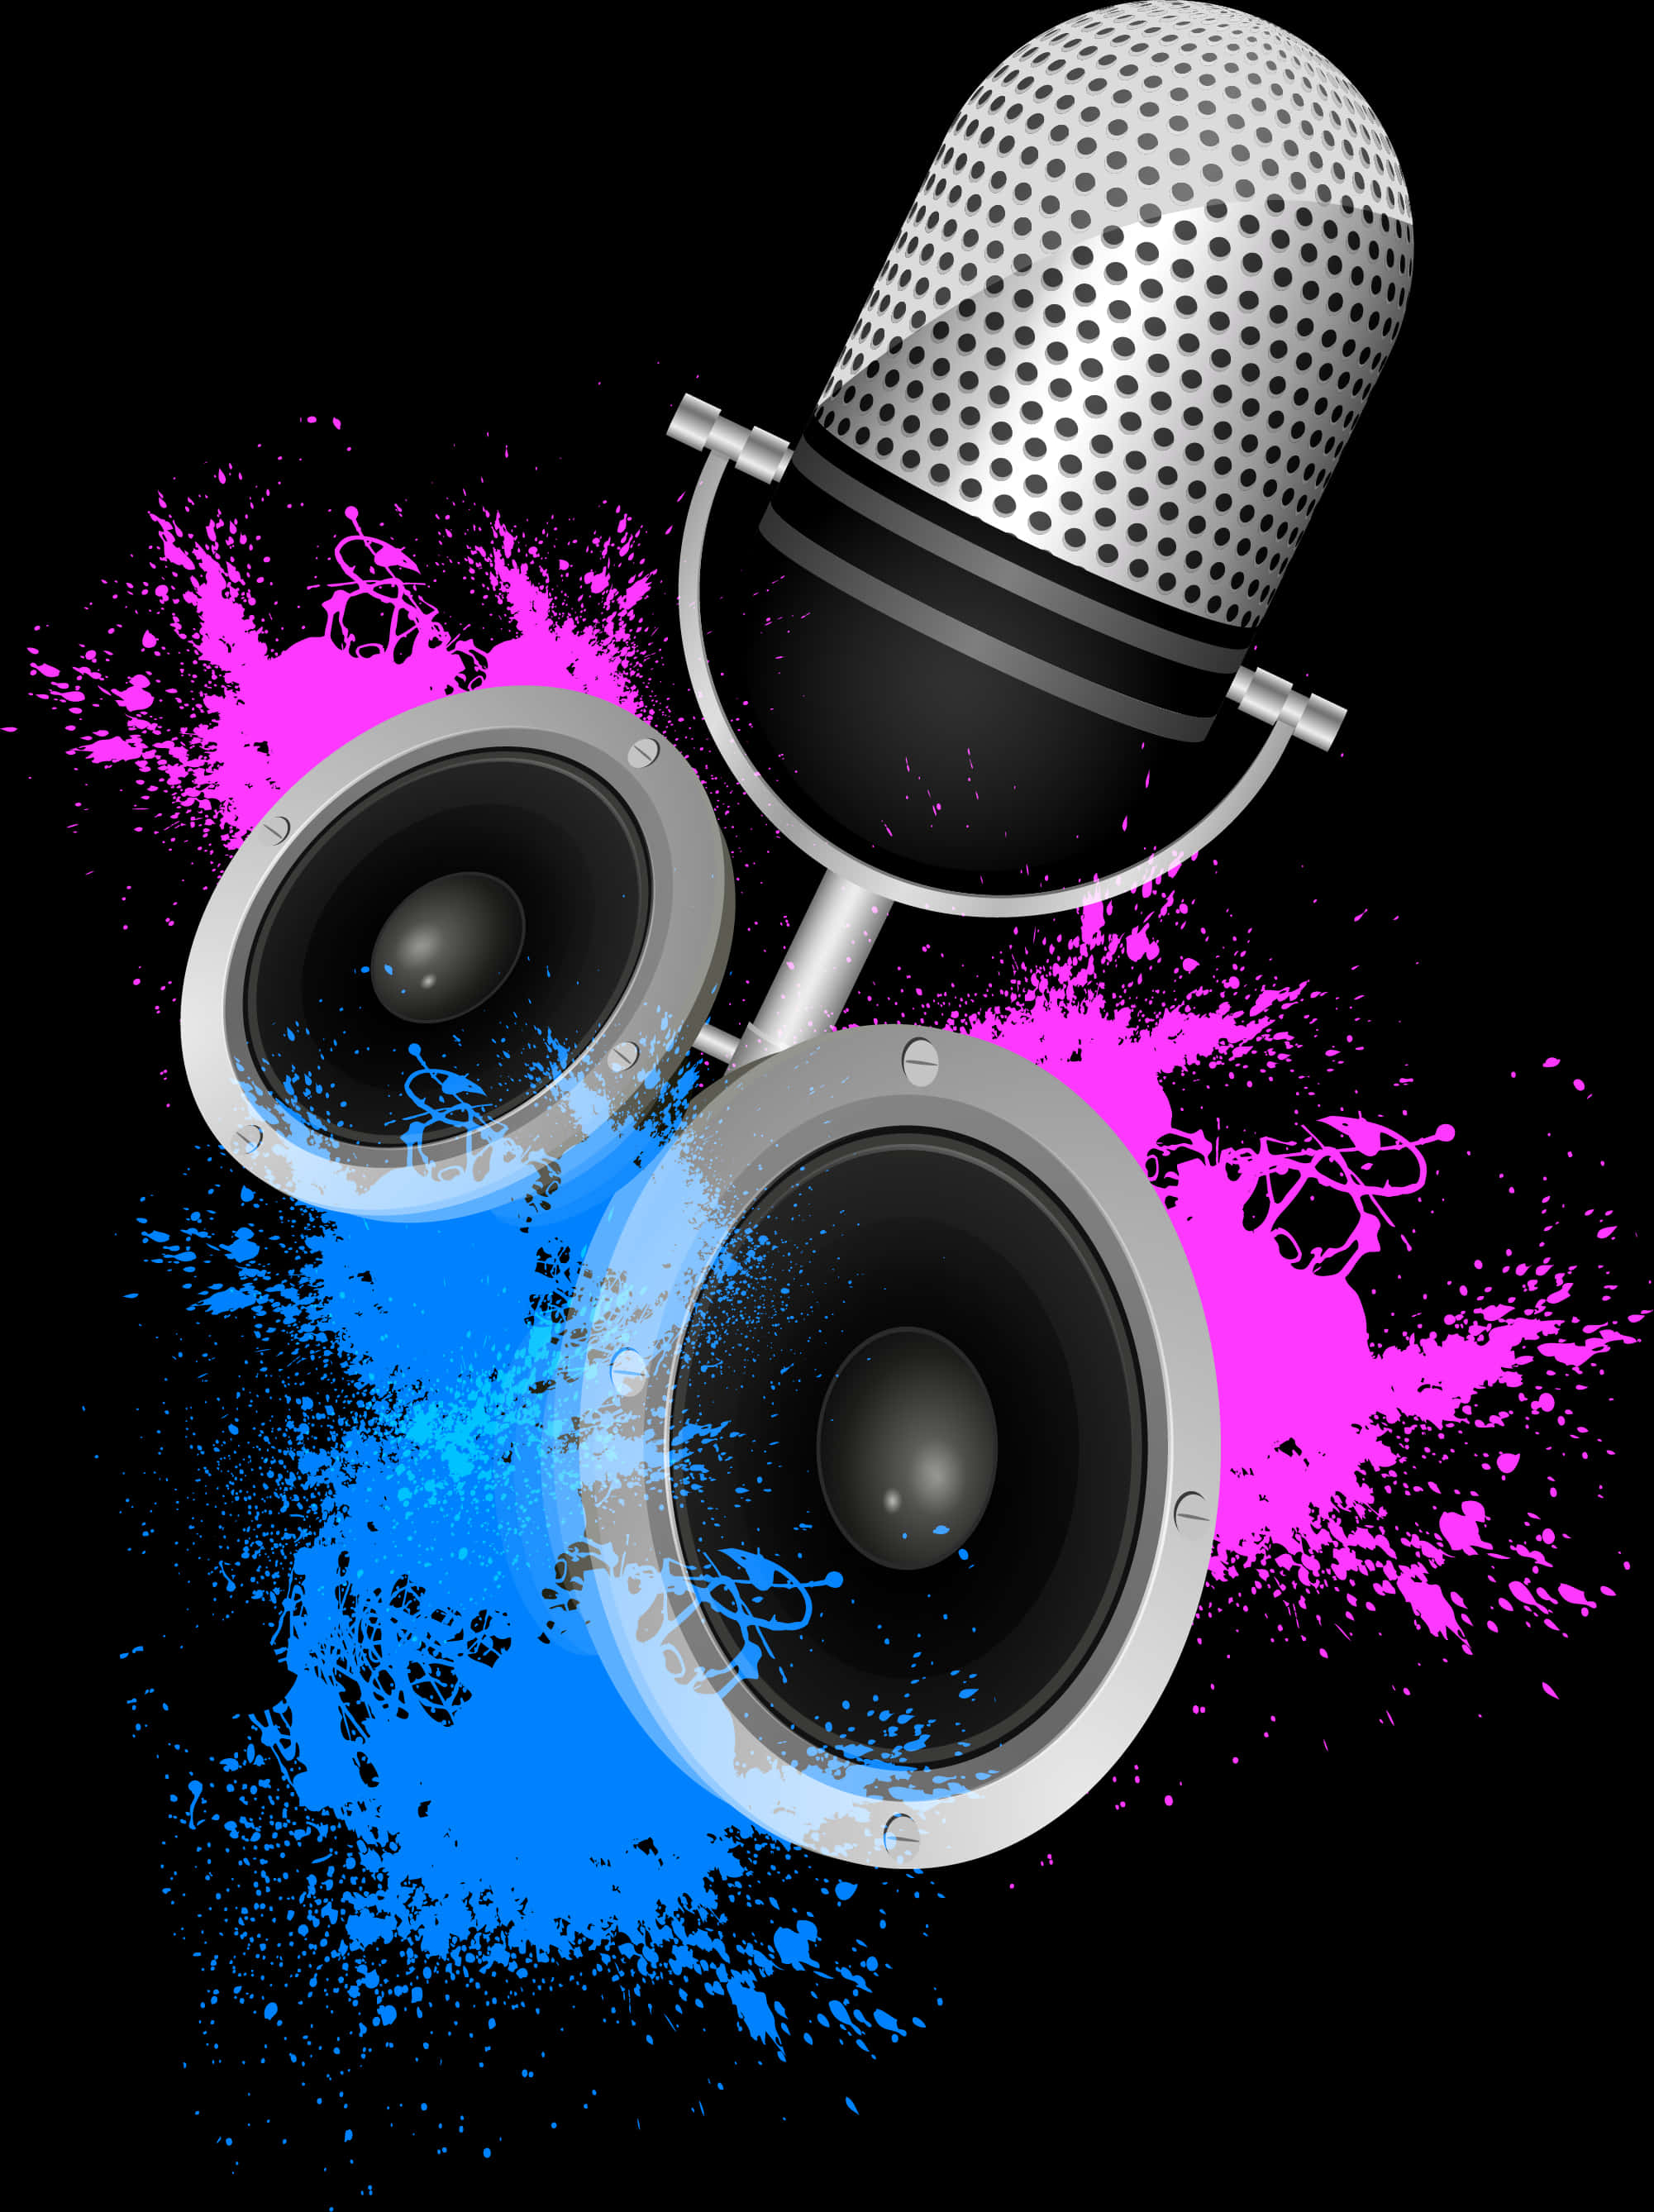 Microphoneand Speakerswith Color Splash